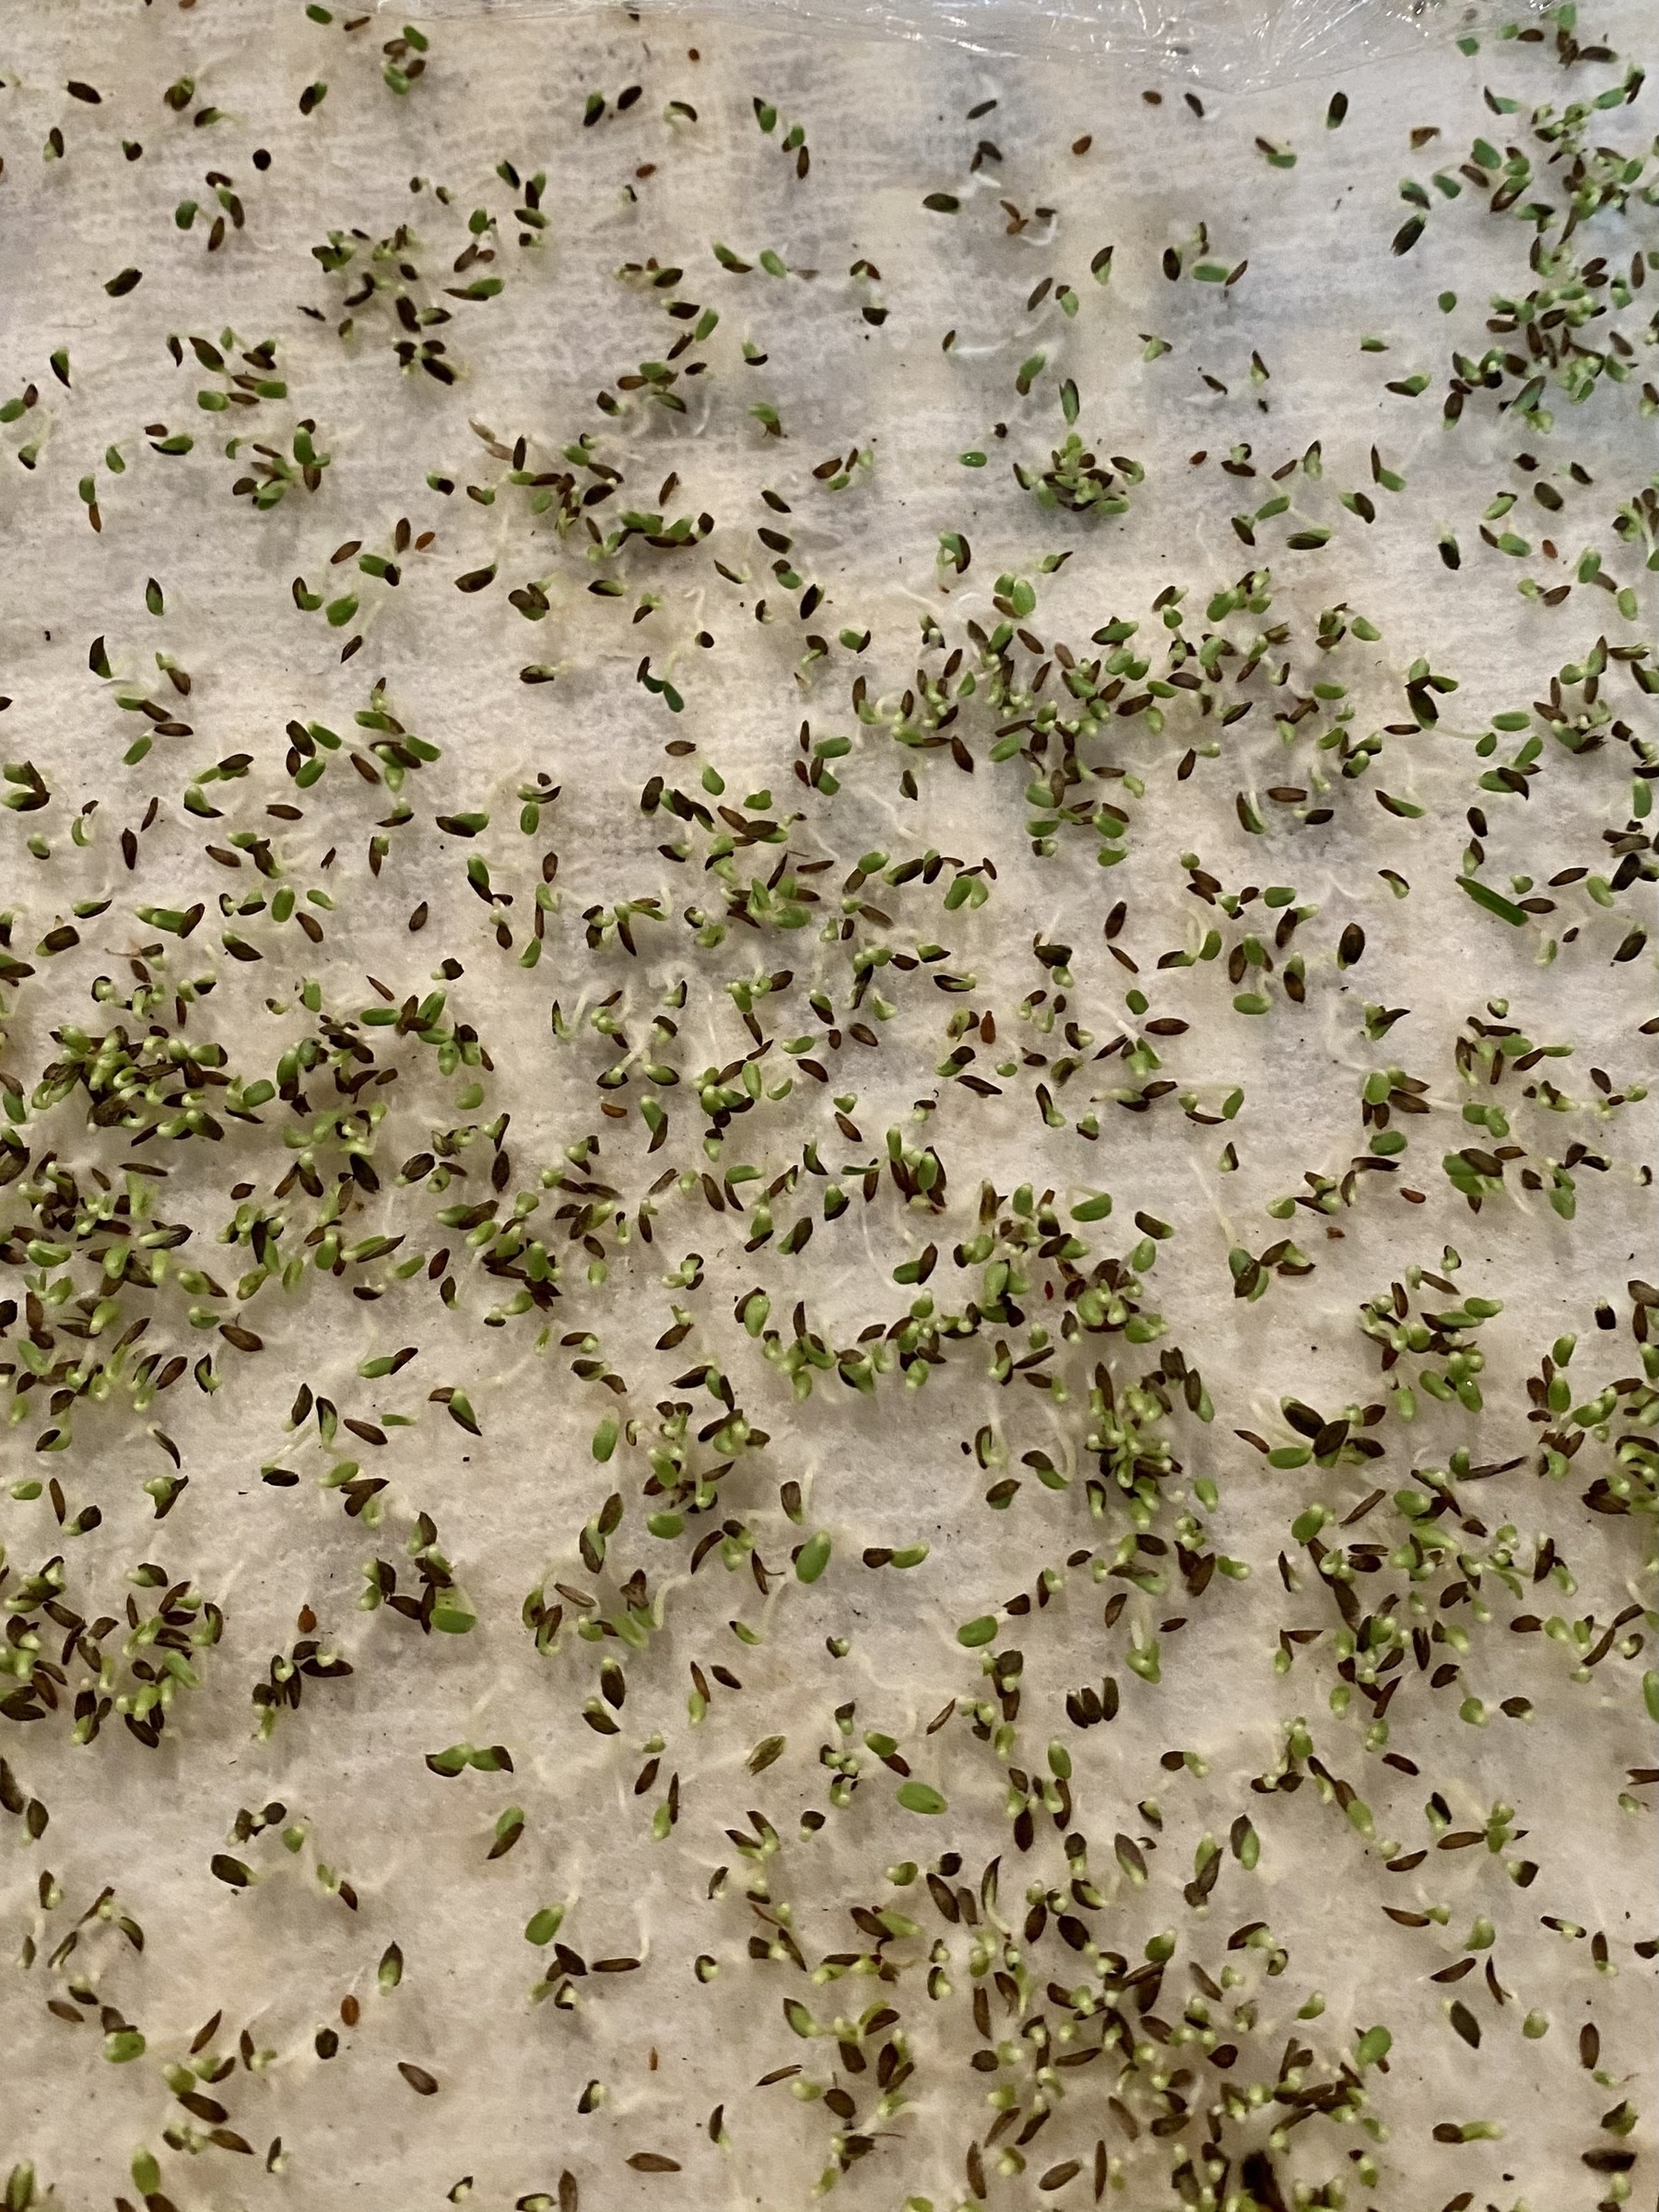 Dozens of lettuce seeds germinating on a paper towel